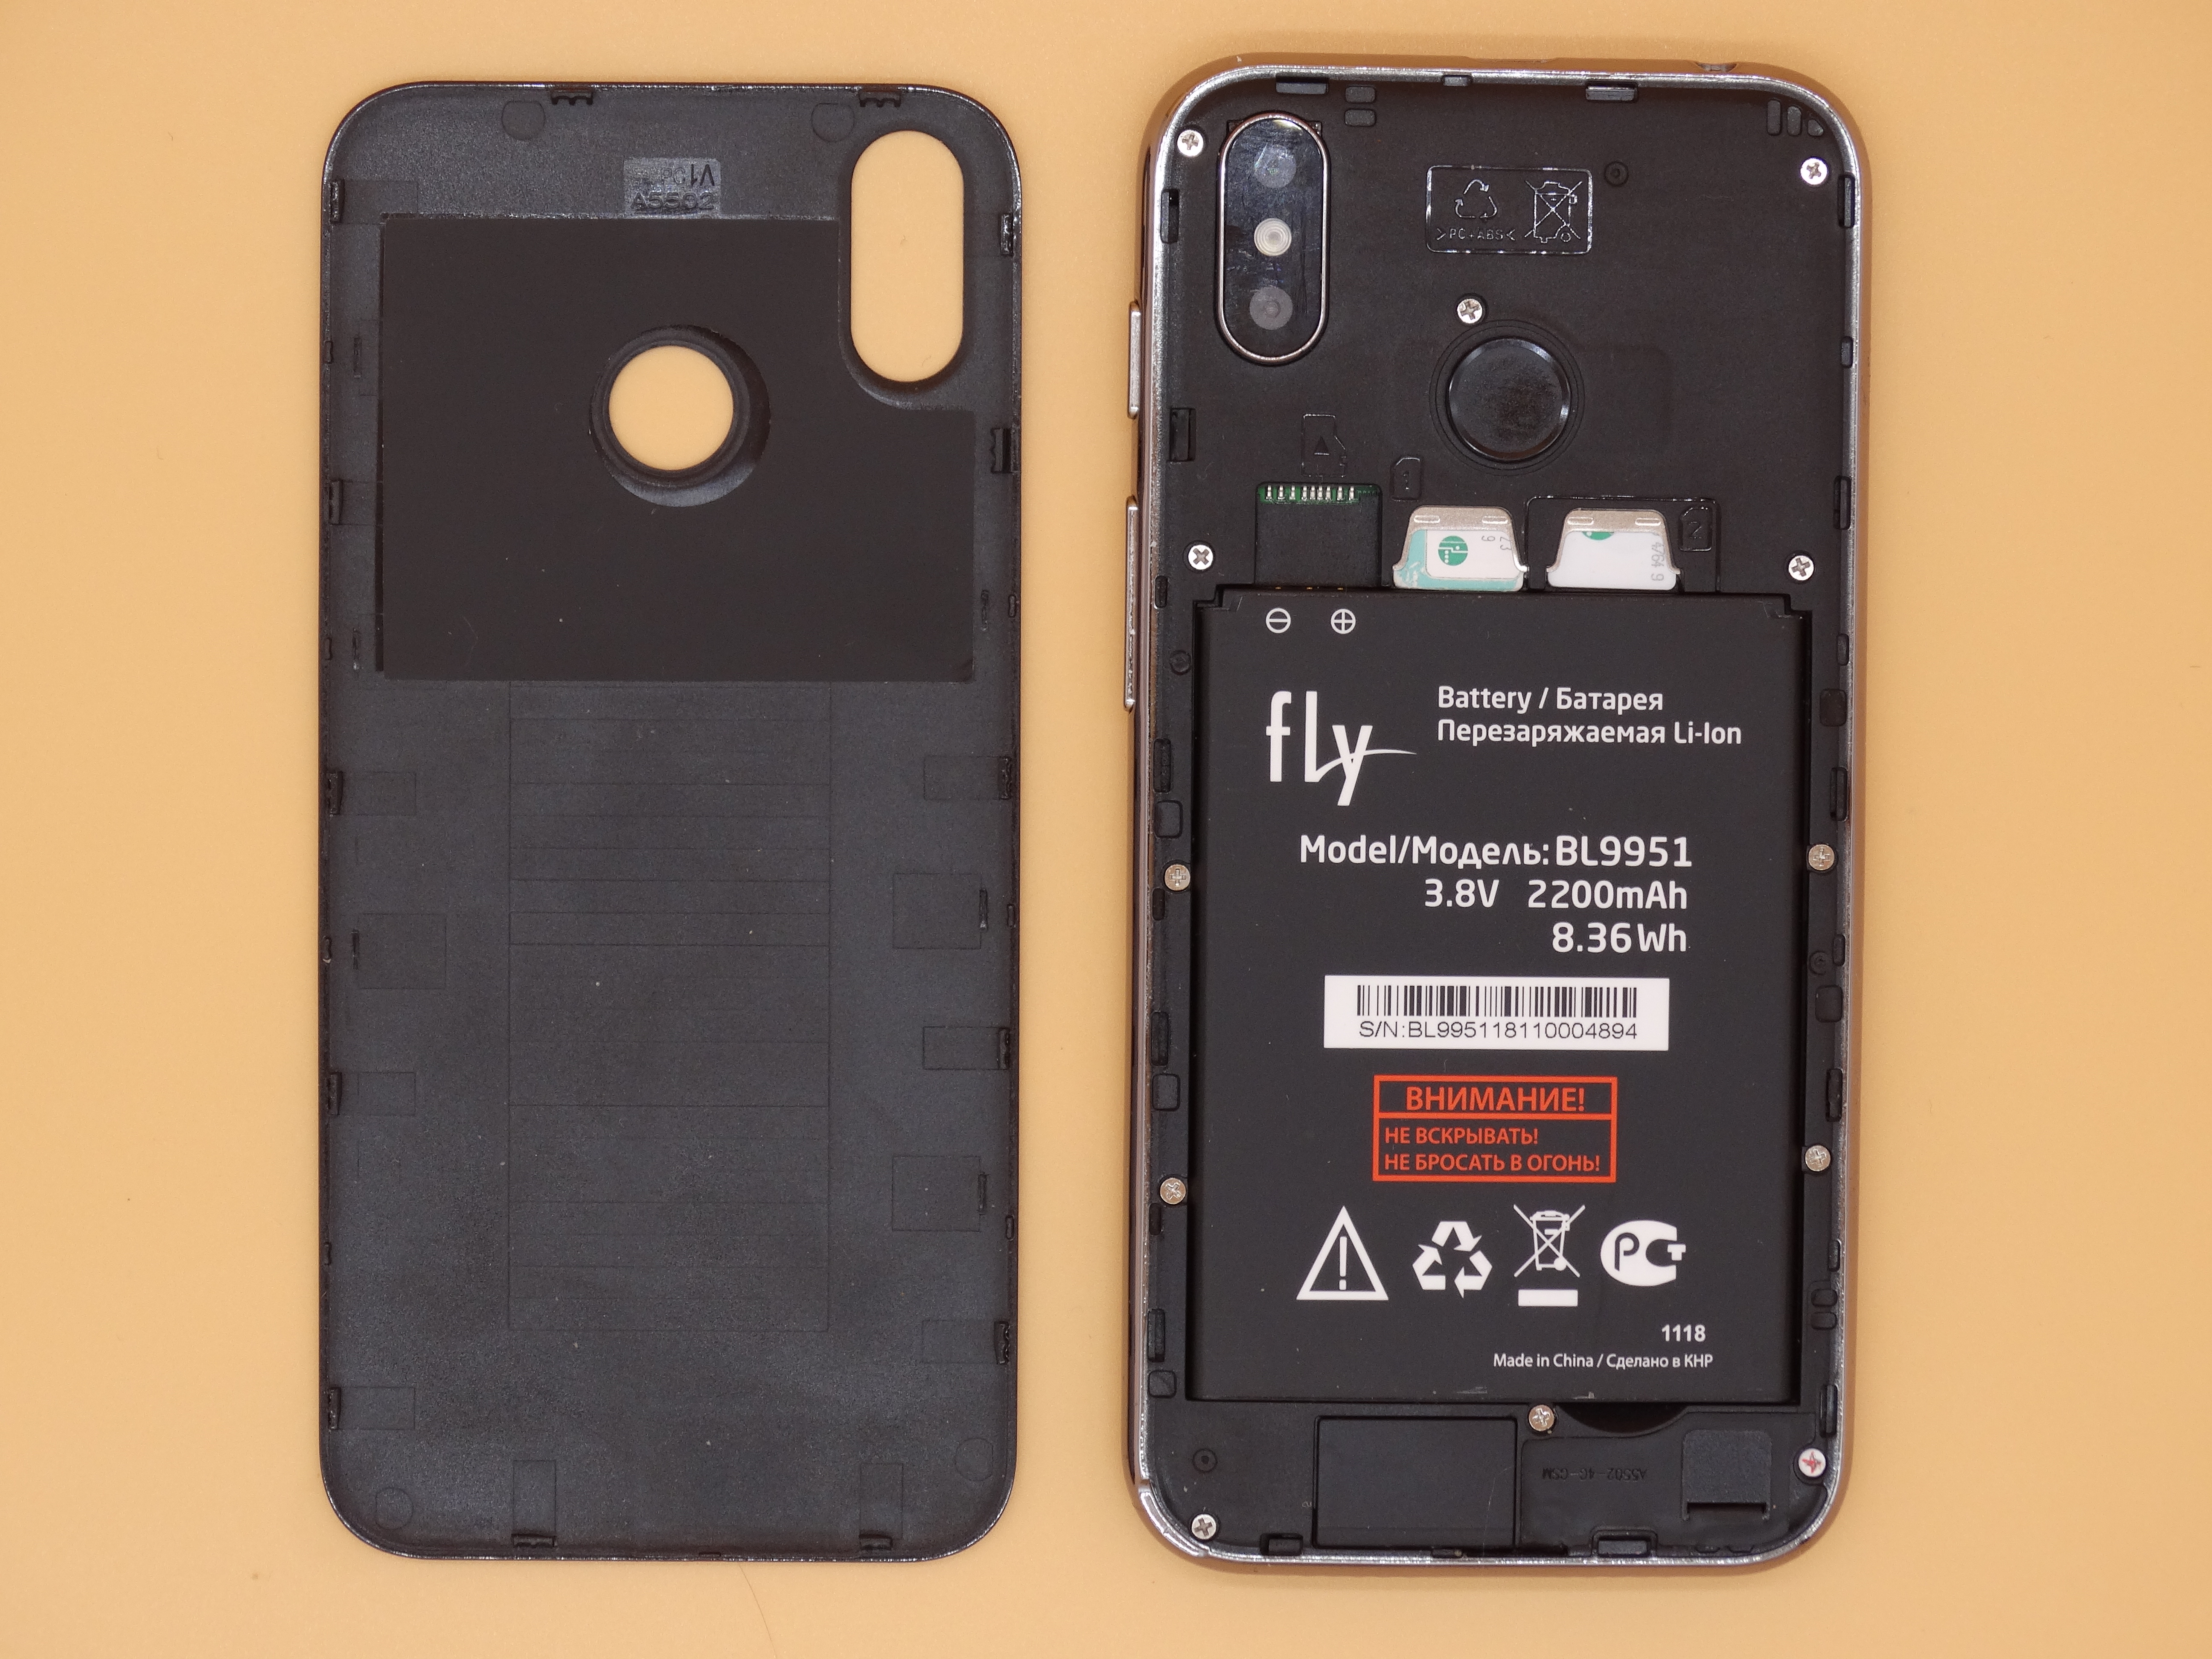 Fly battery. Батарейка Fly bl9951. Аккумулятор для Fly bl9801. Аккумулятор для телефона Fly view bl9019. Смартфон Fly view Max.